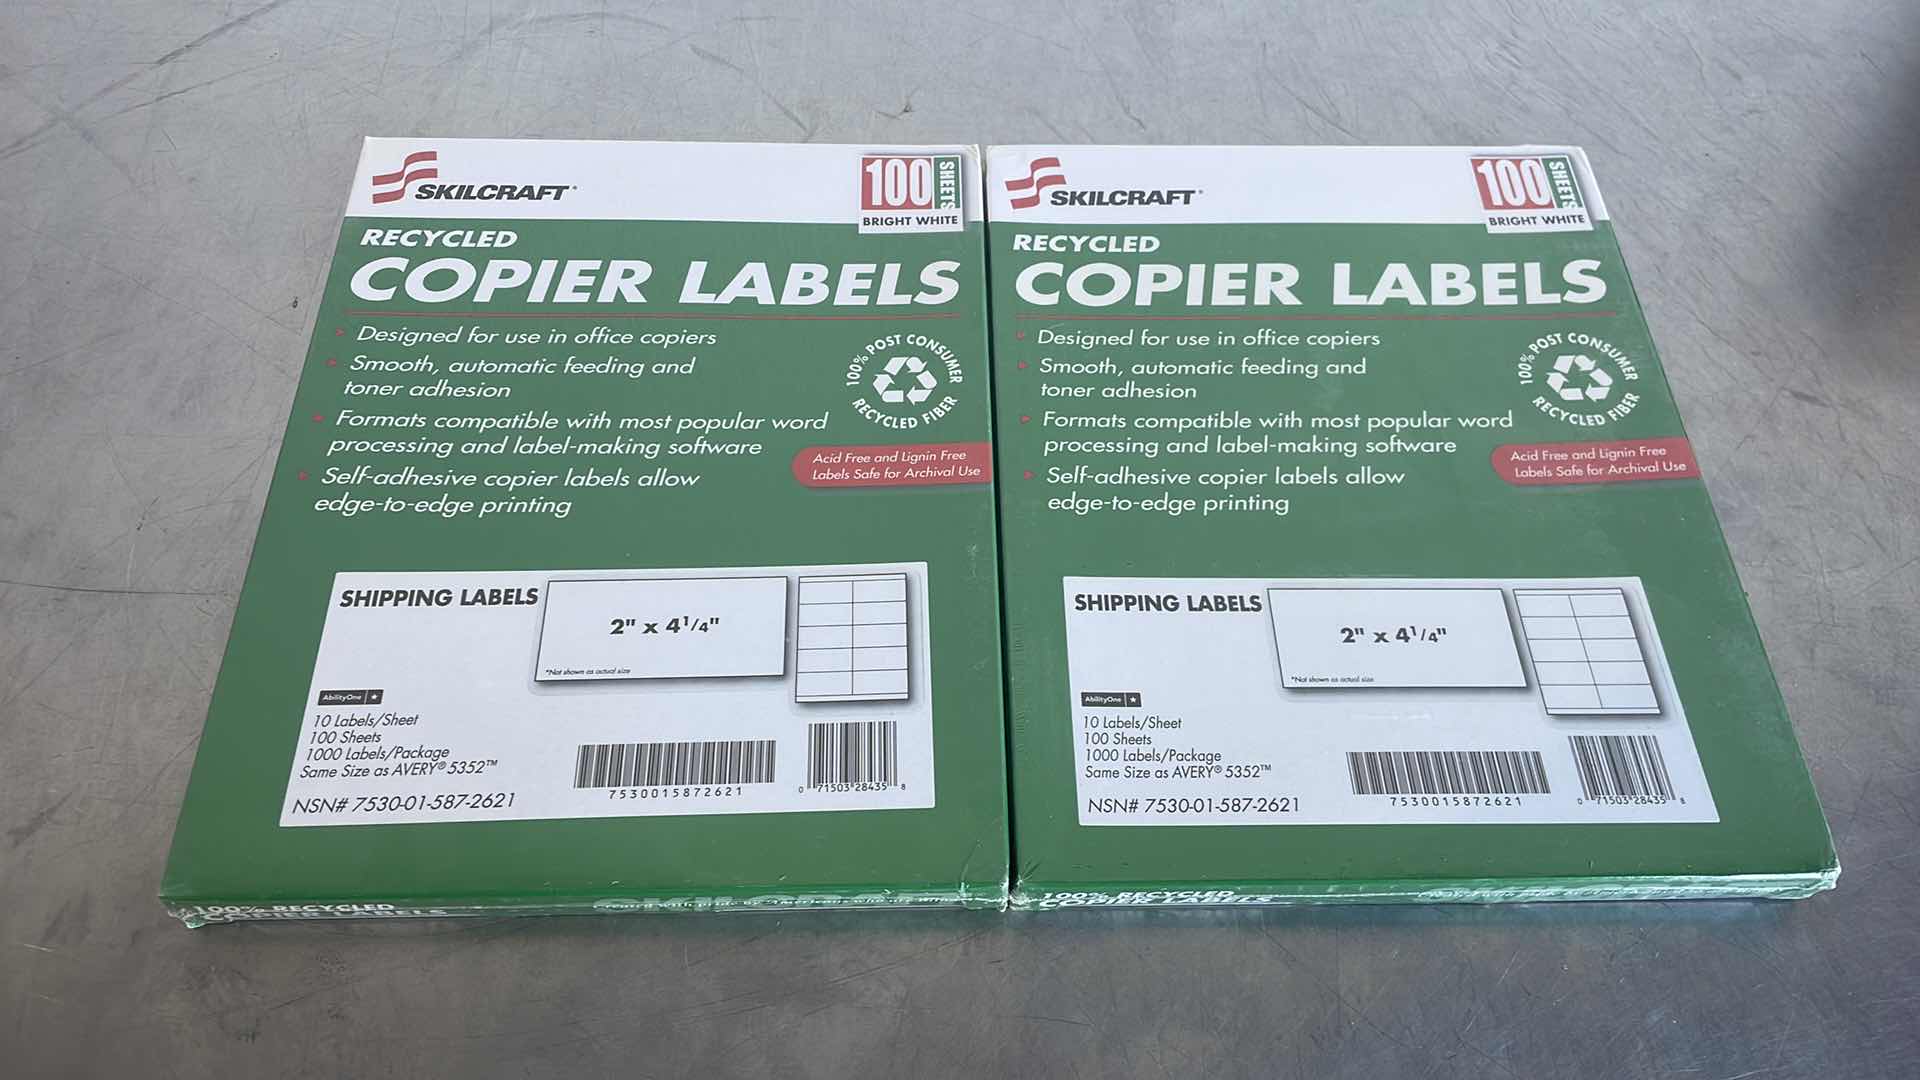 Photo 1 of SKILCRAFT RECYCLED COPIER LABELS